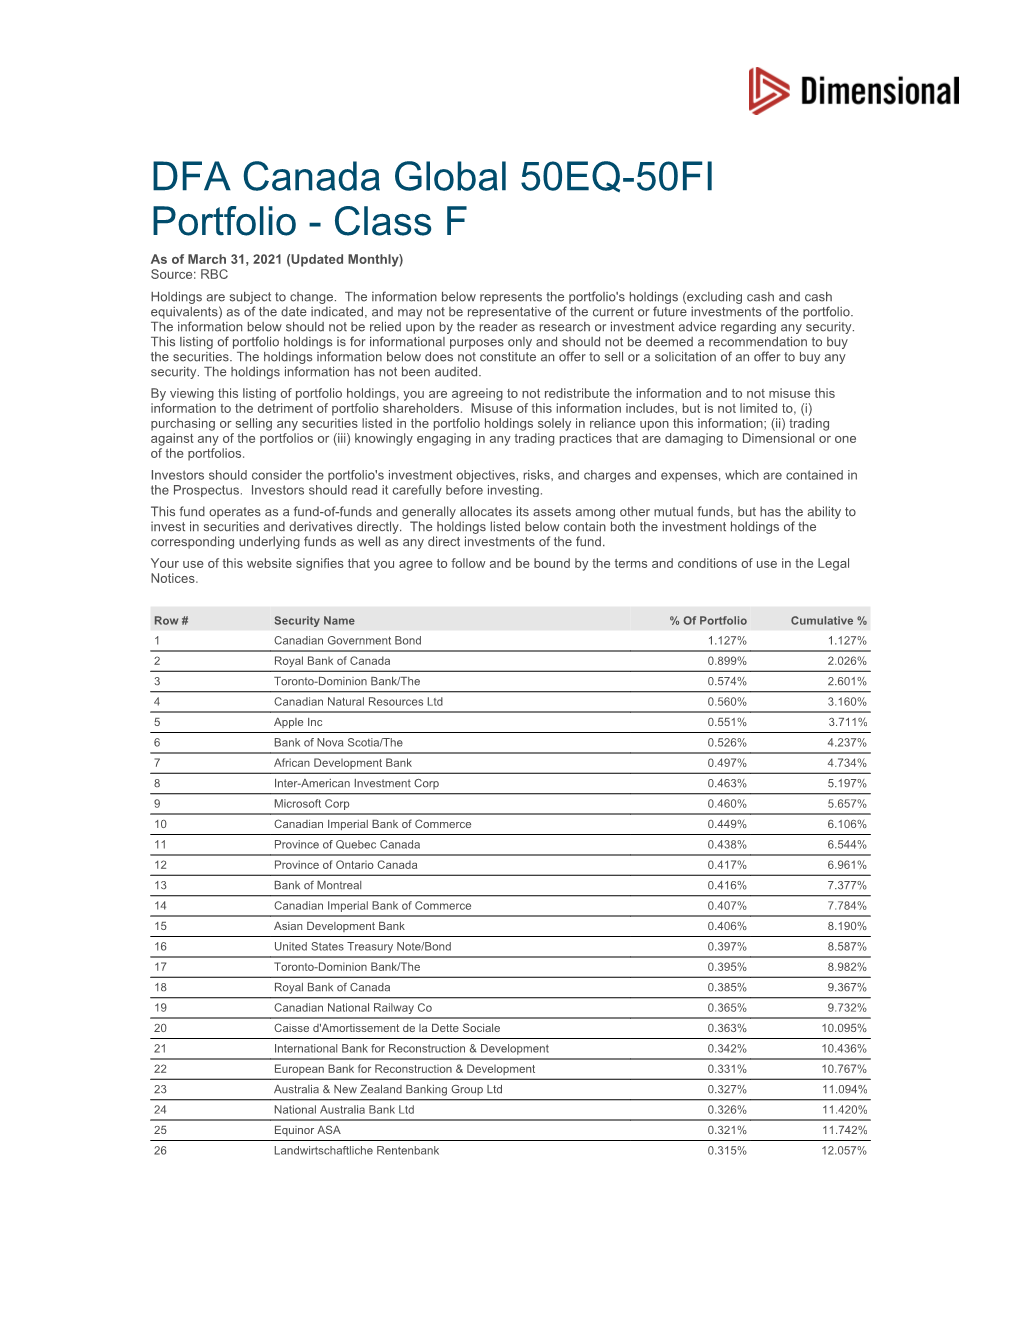 DFA Canada Global 50EQ-50FI Portfolio - Class F As of March 31, 2021 (Updated Monthly) Source: RBC Holdings Are Subject to Change